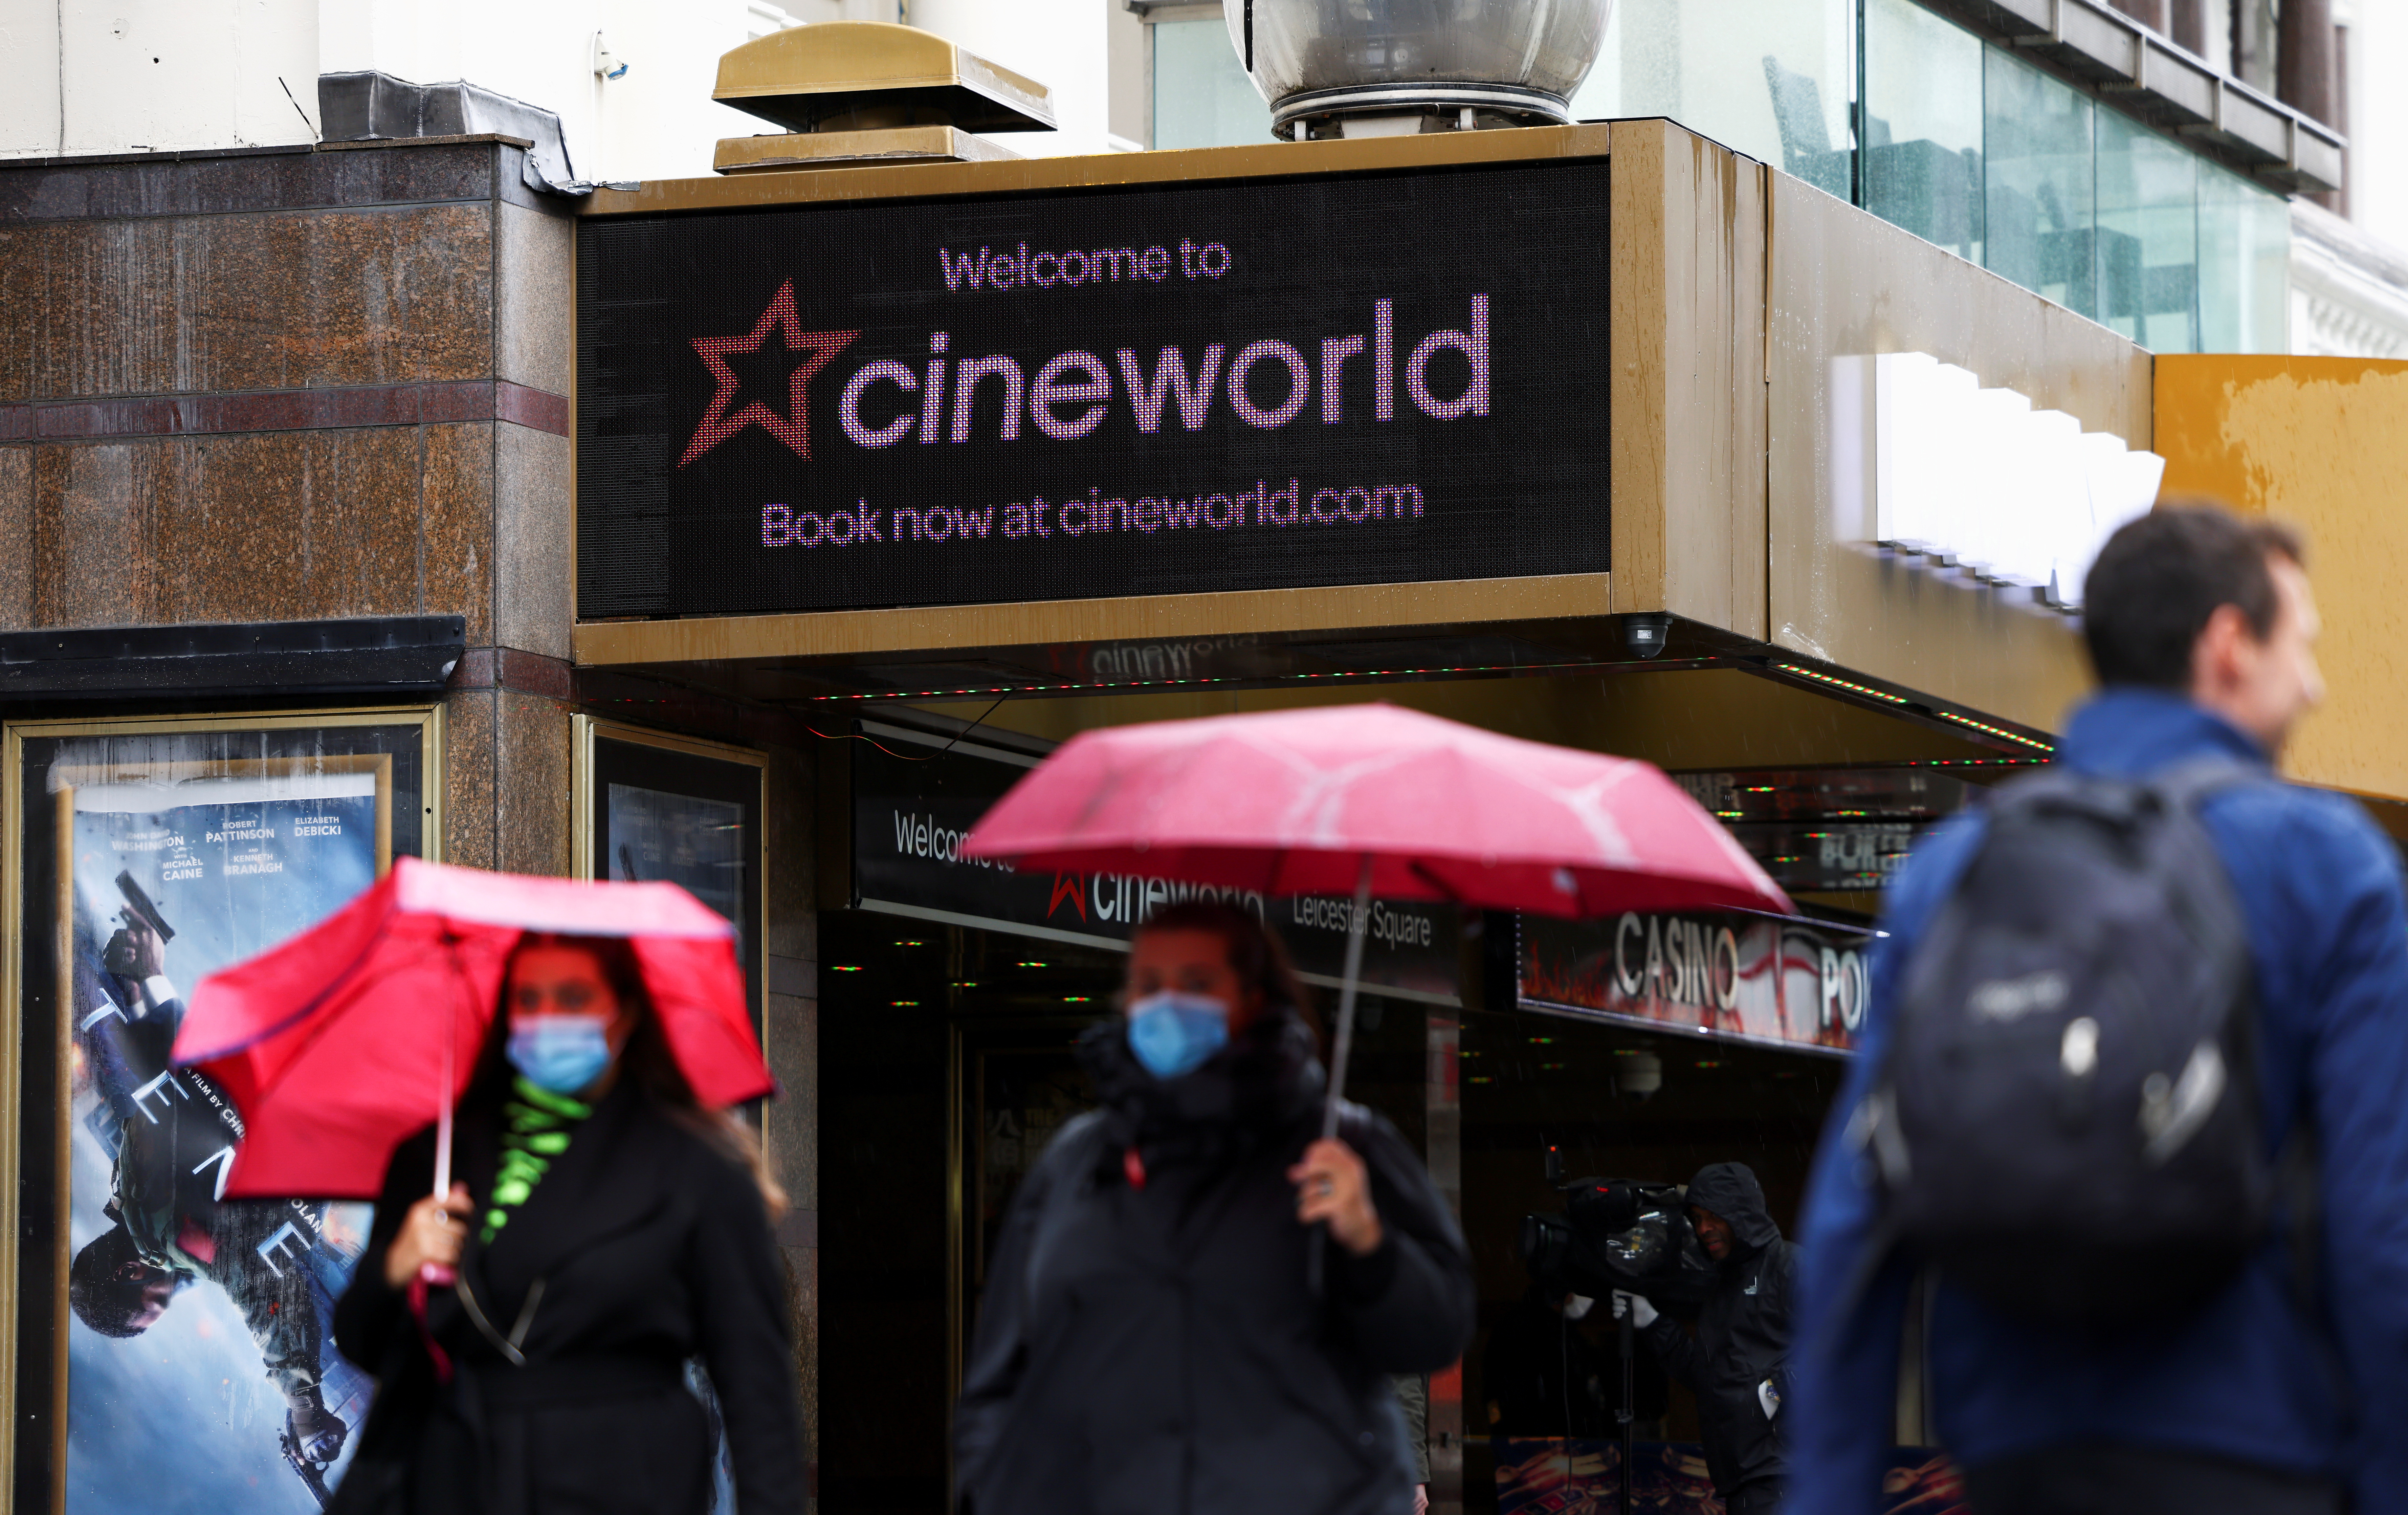 People walk past a Cineworld in Leicester's Square, amid the coronavirus disease (COVID-19) outbreak in London, Britain, October 4, 2020. REUTERS/Henry Nicholls/File Photo